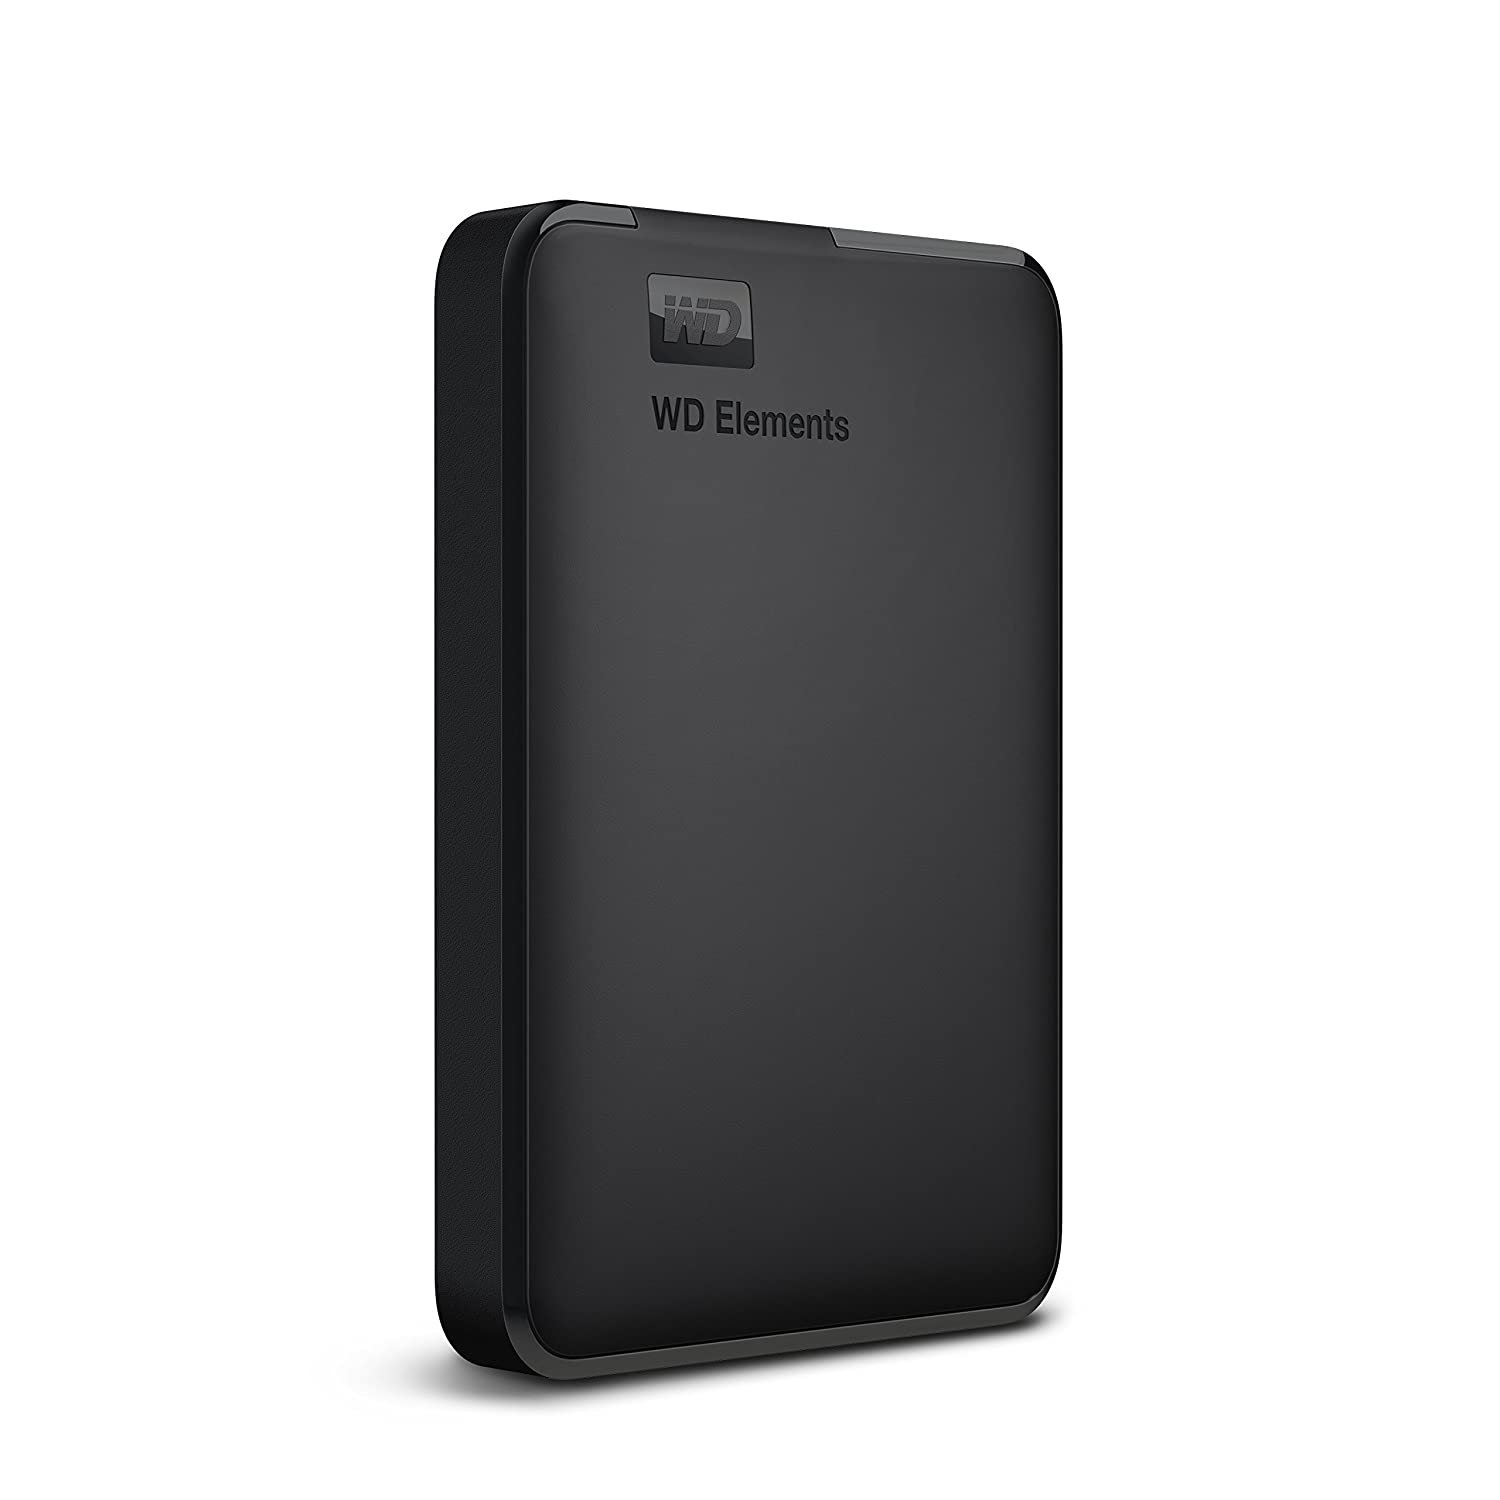 Western Digital WD Elements USB 3.0 1TB Portable External Hard Drive Compatible with PC, Mac, PS4 and Xbox